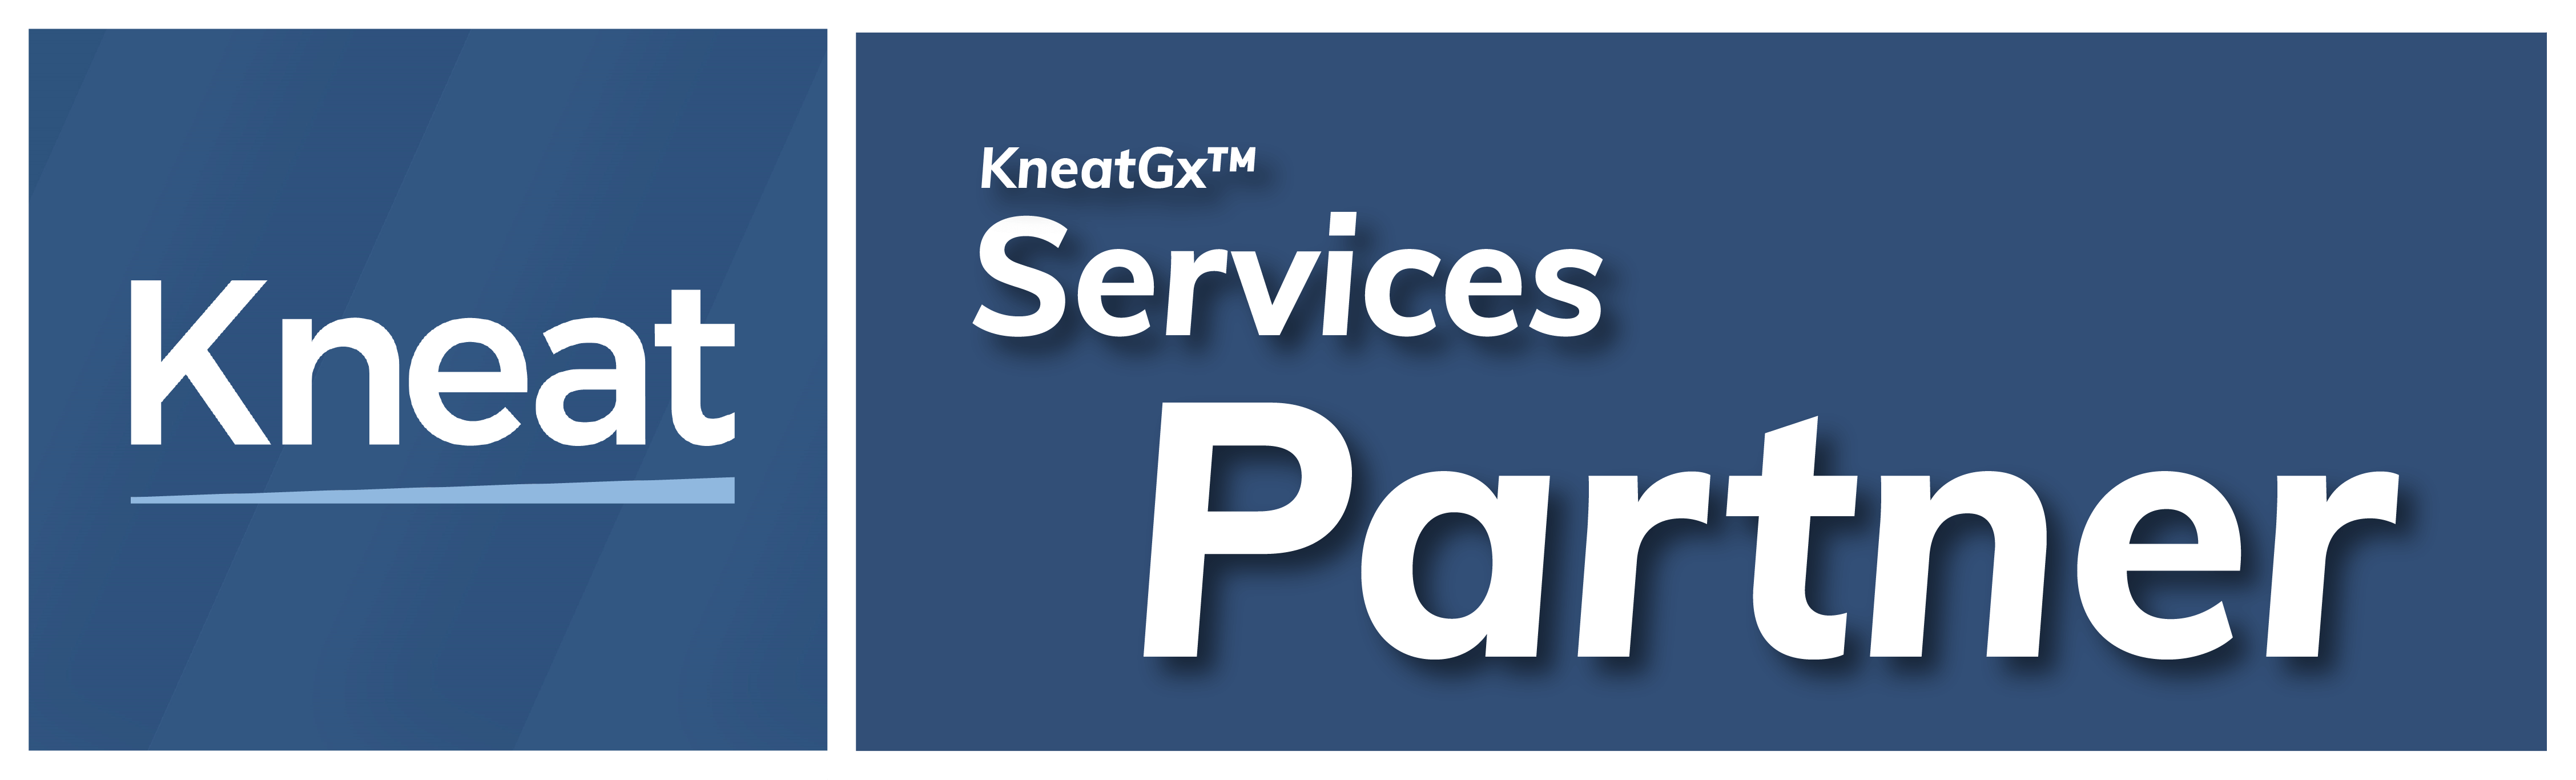 Kneat Services Partner Badge